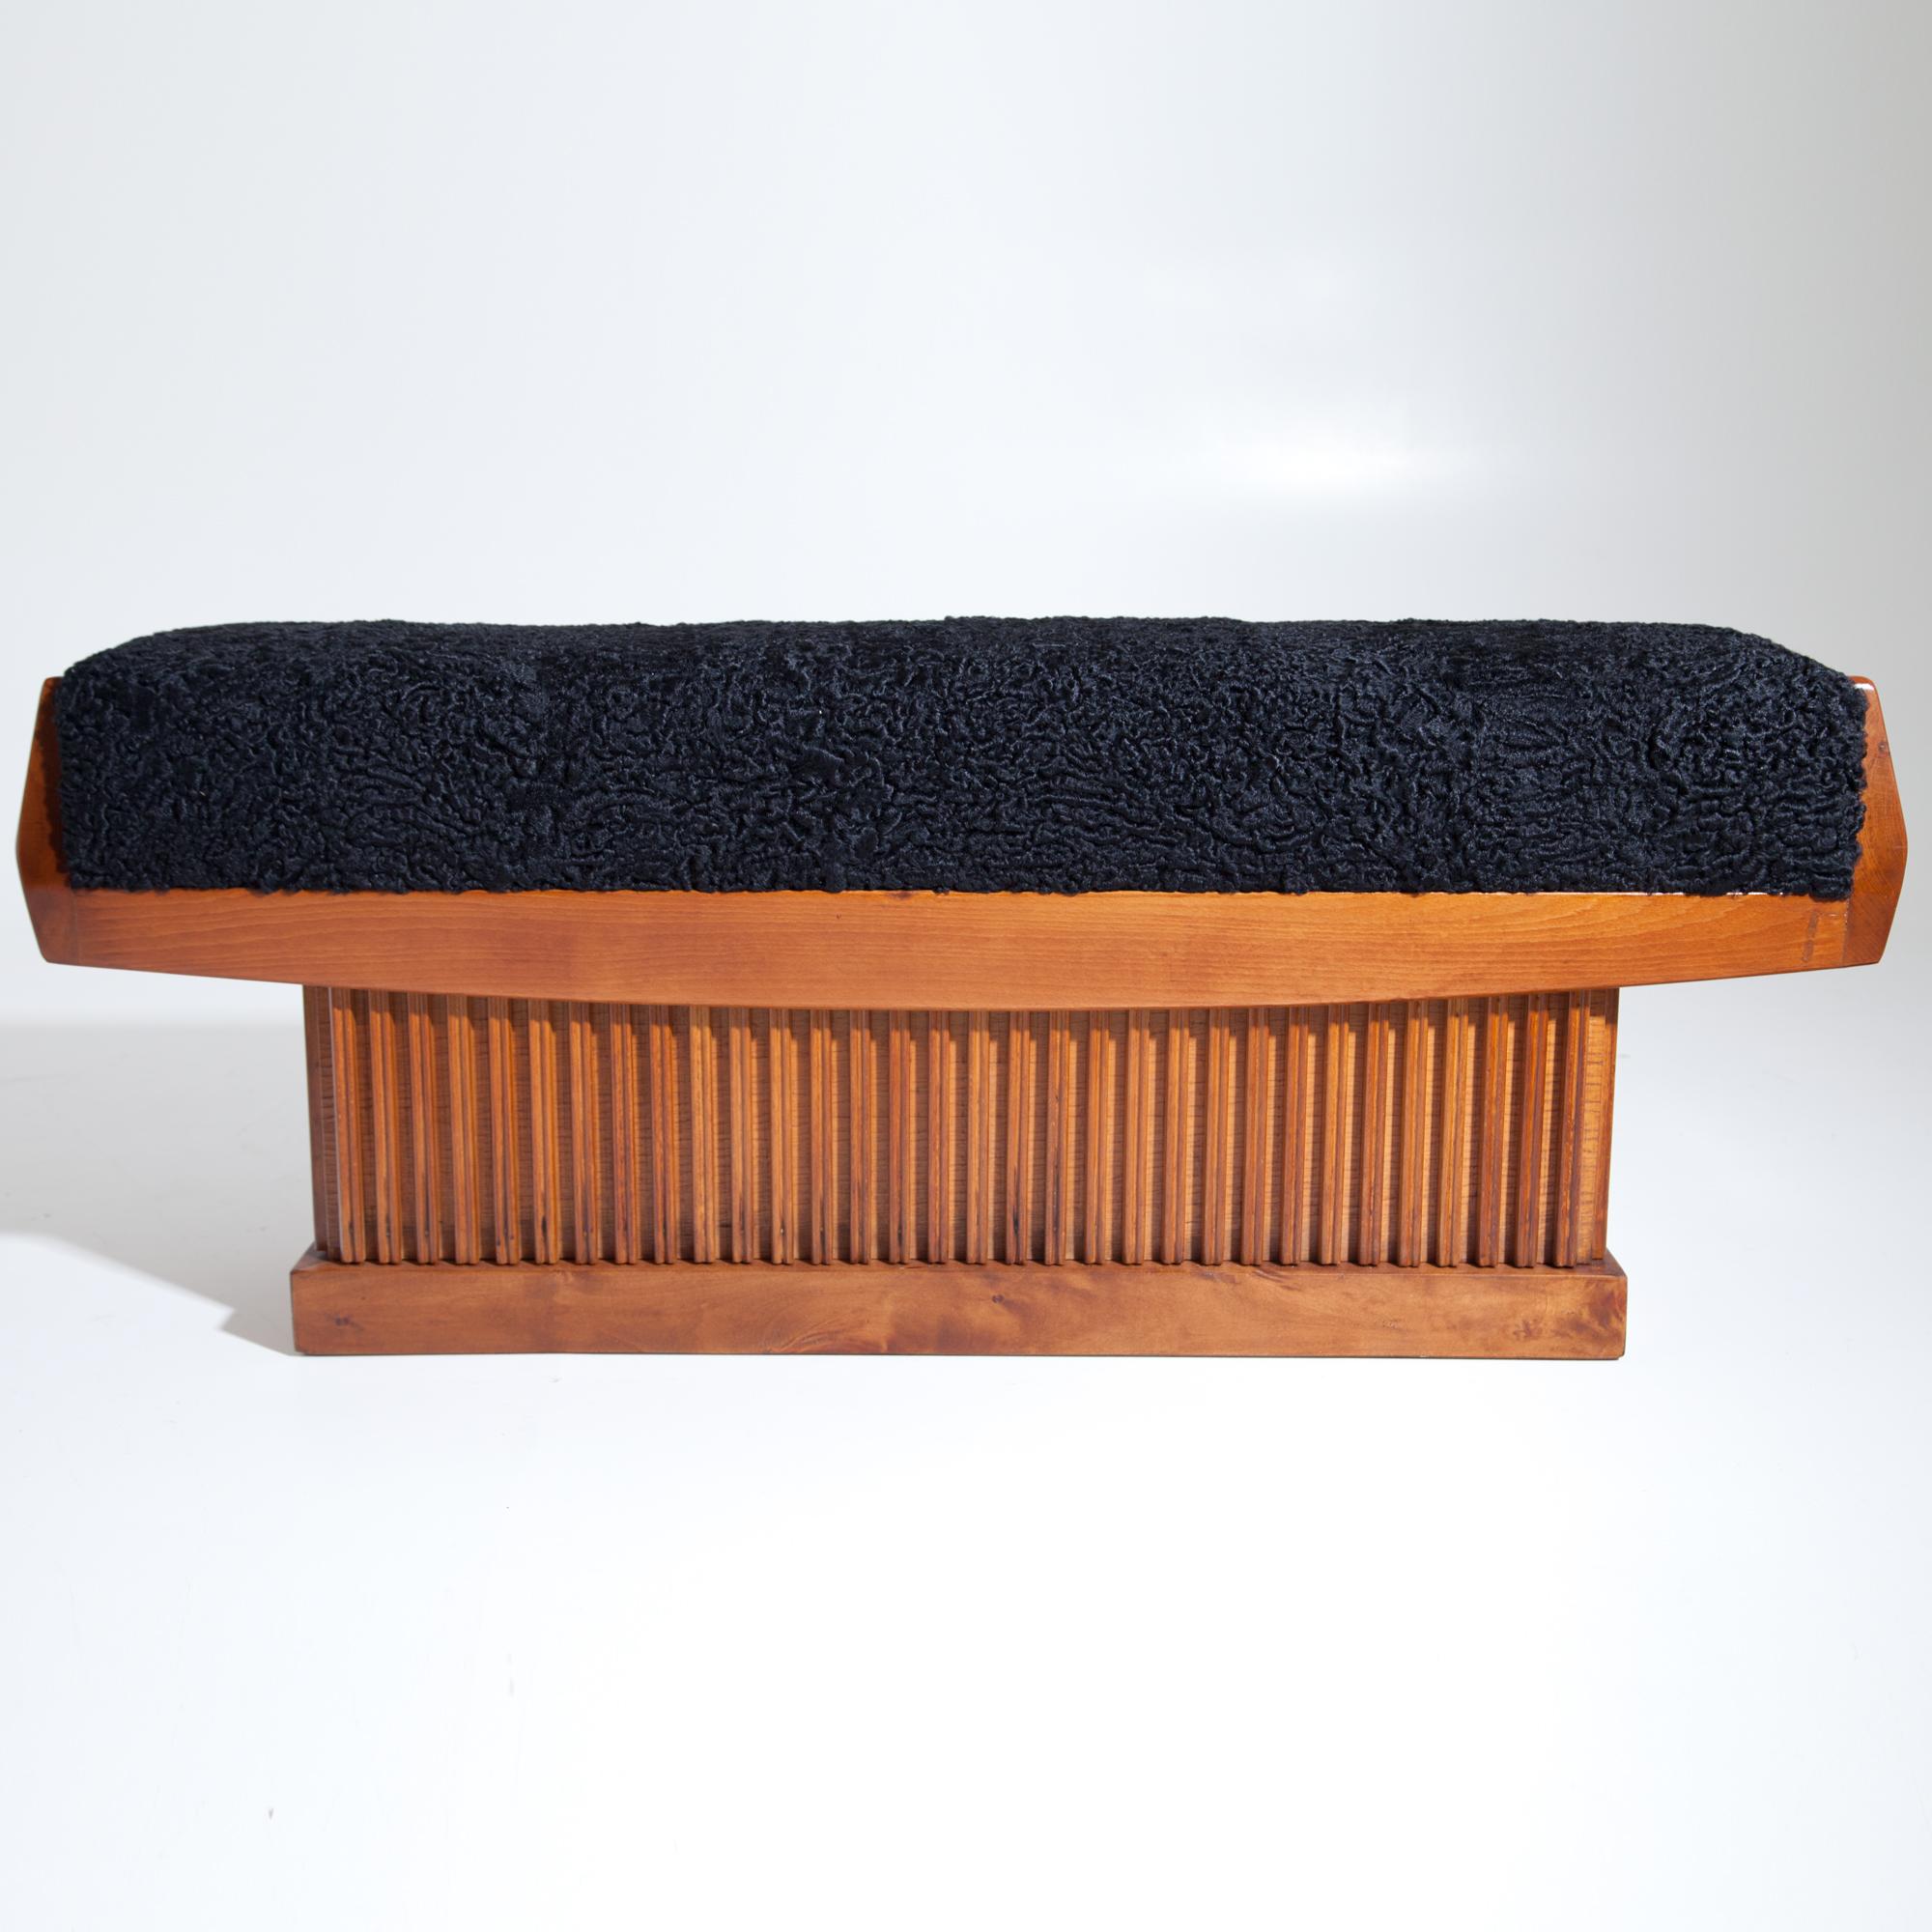 Long bench on block foot with vertical slats. The bench was newly covered with a black Persian fur.